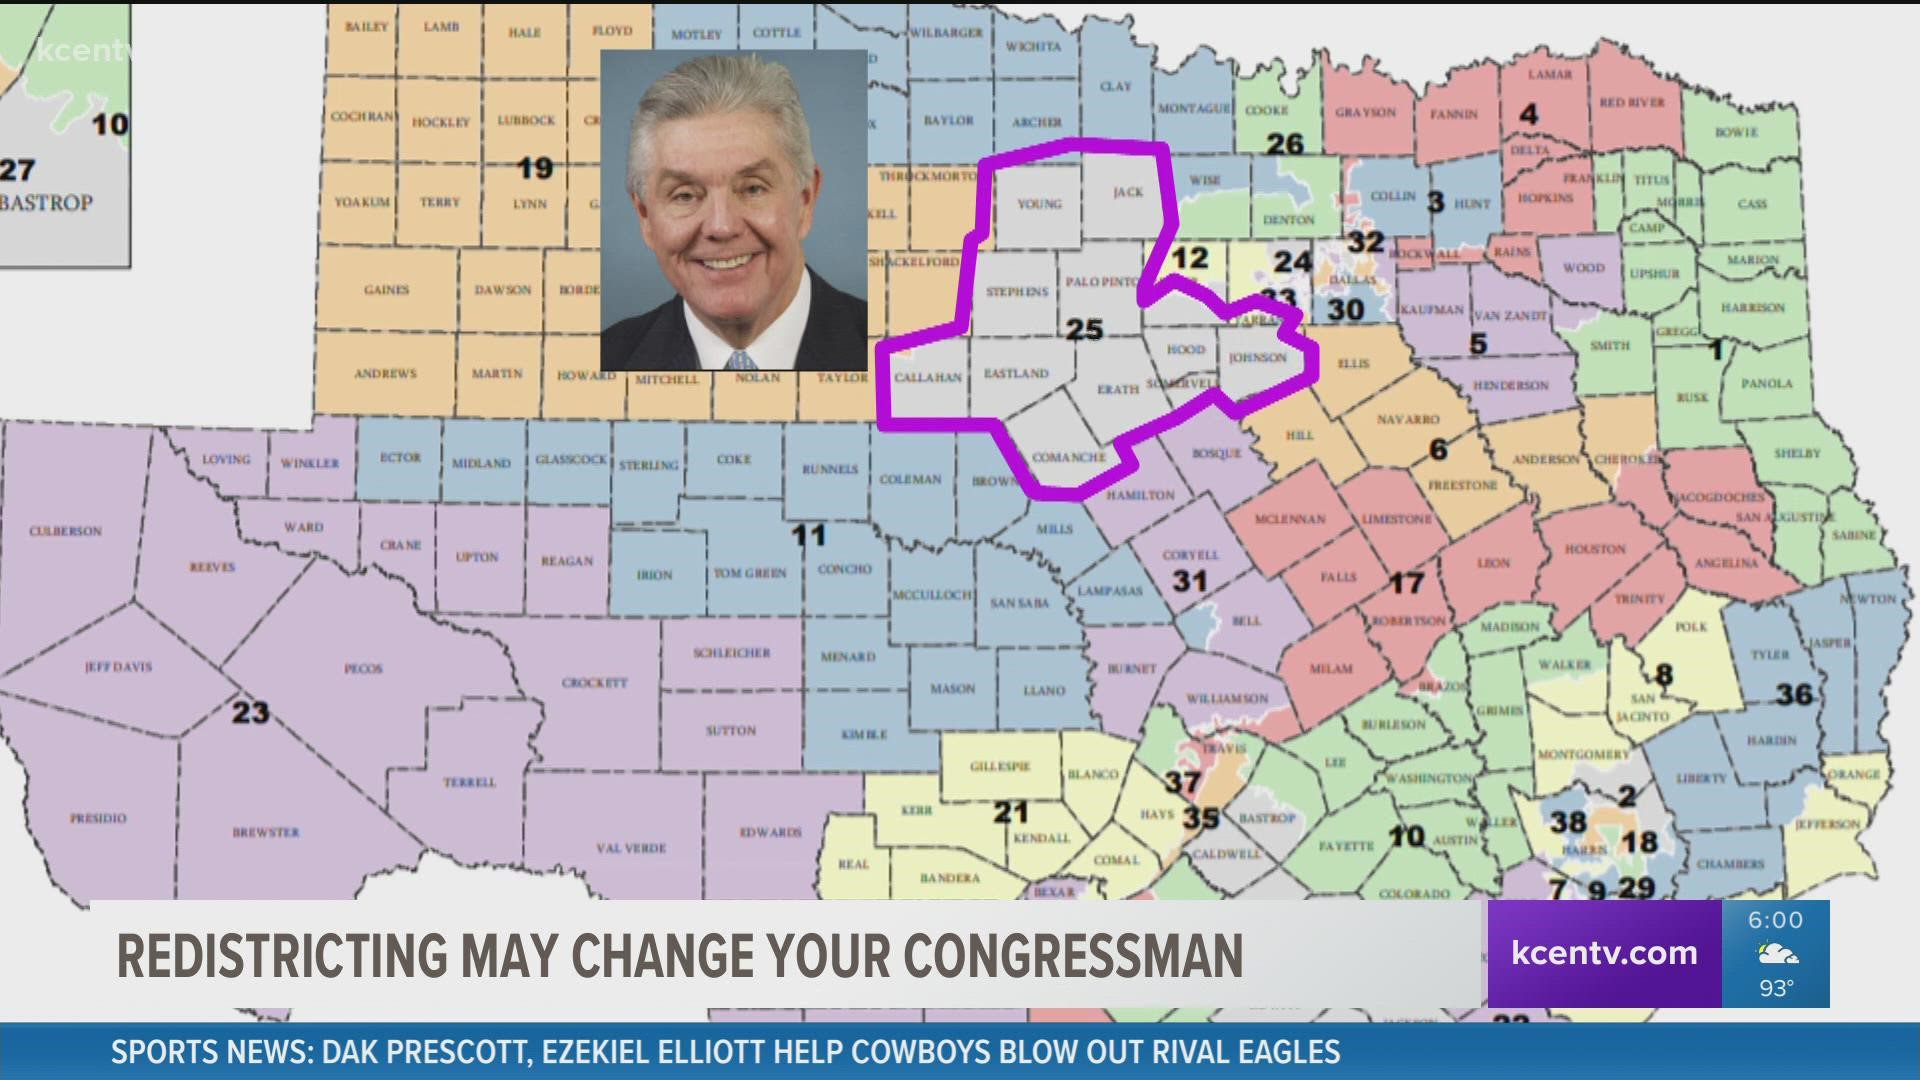 Texas lawmakers are redrawing district lines, which means the person who represents you on Capitol Hill could change.